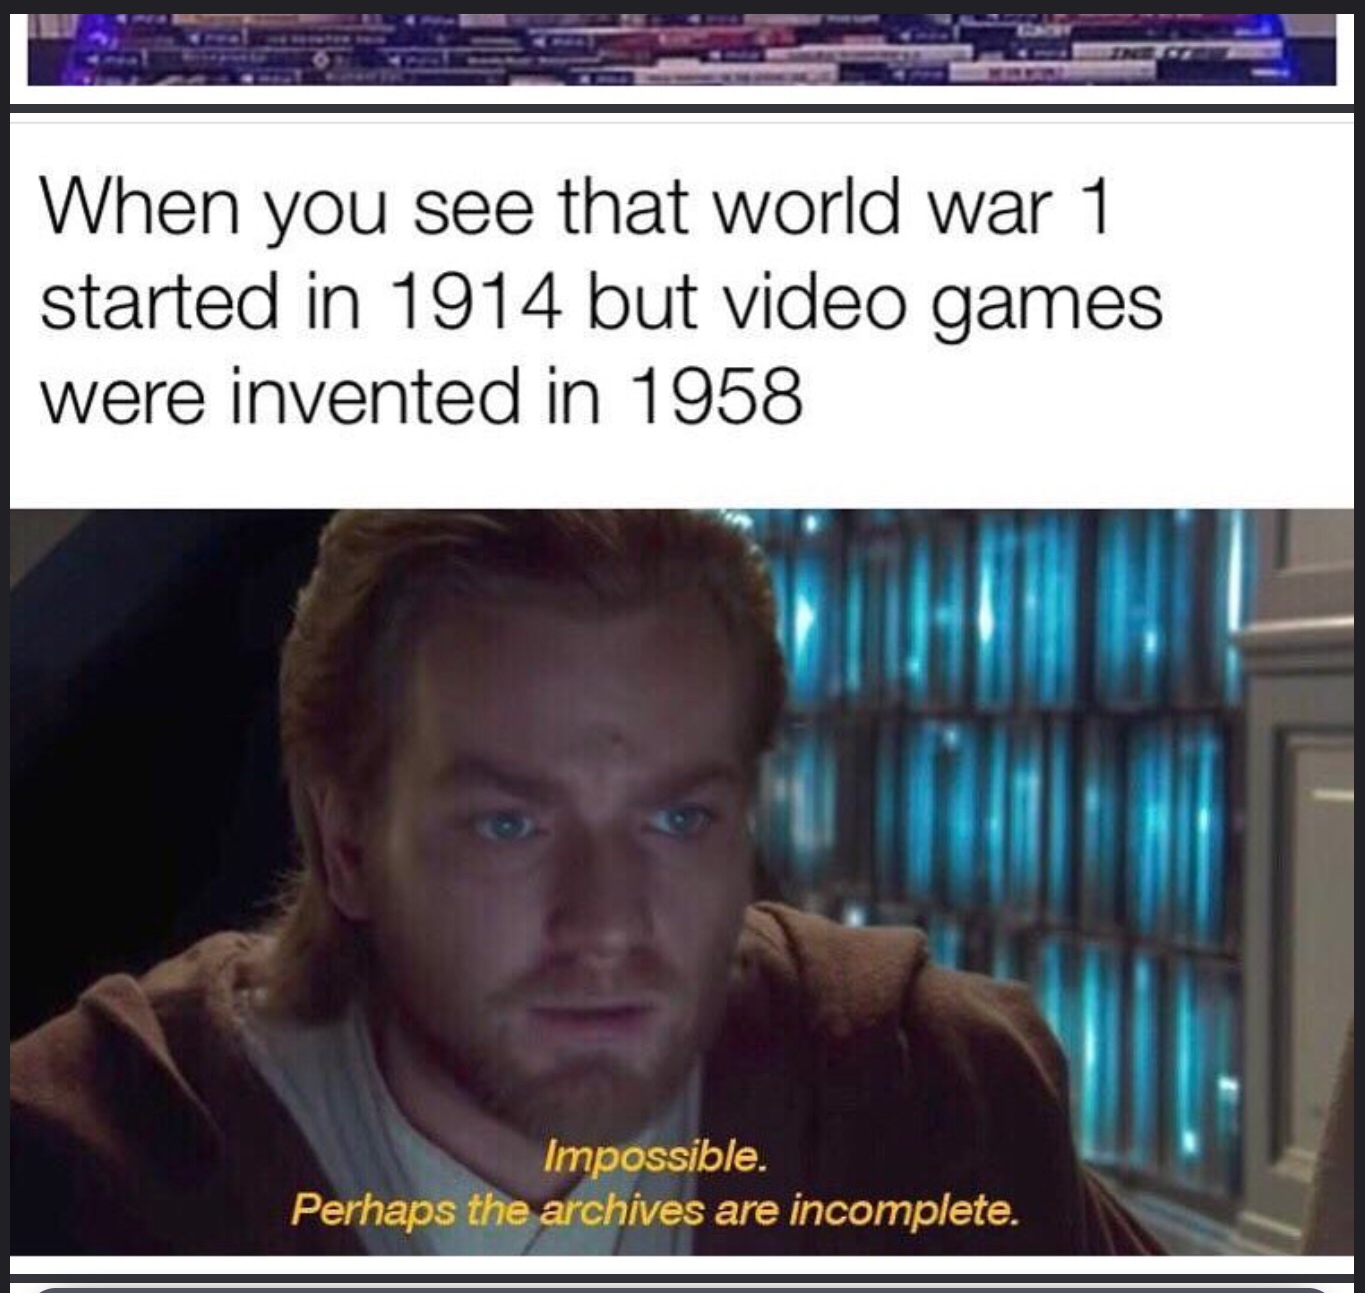 open book test meme - When you see that world war 1 started in 1914 but video games were invented in 1958 Impossible. Perhaps the archives are incomplete.